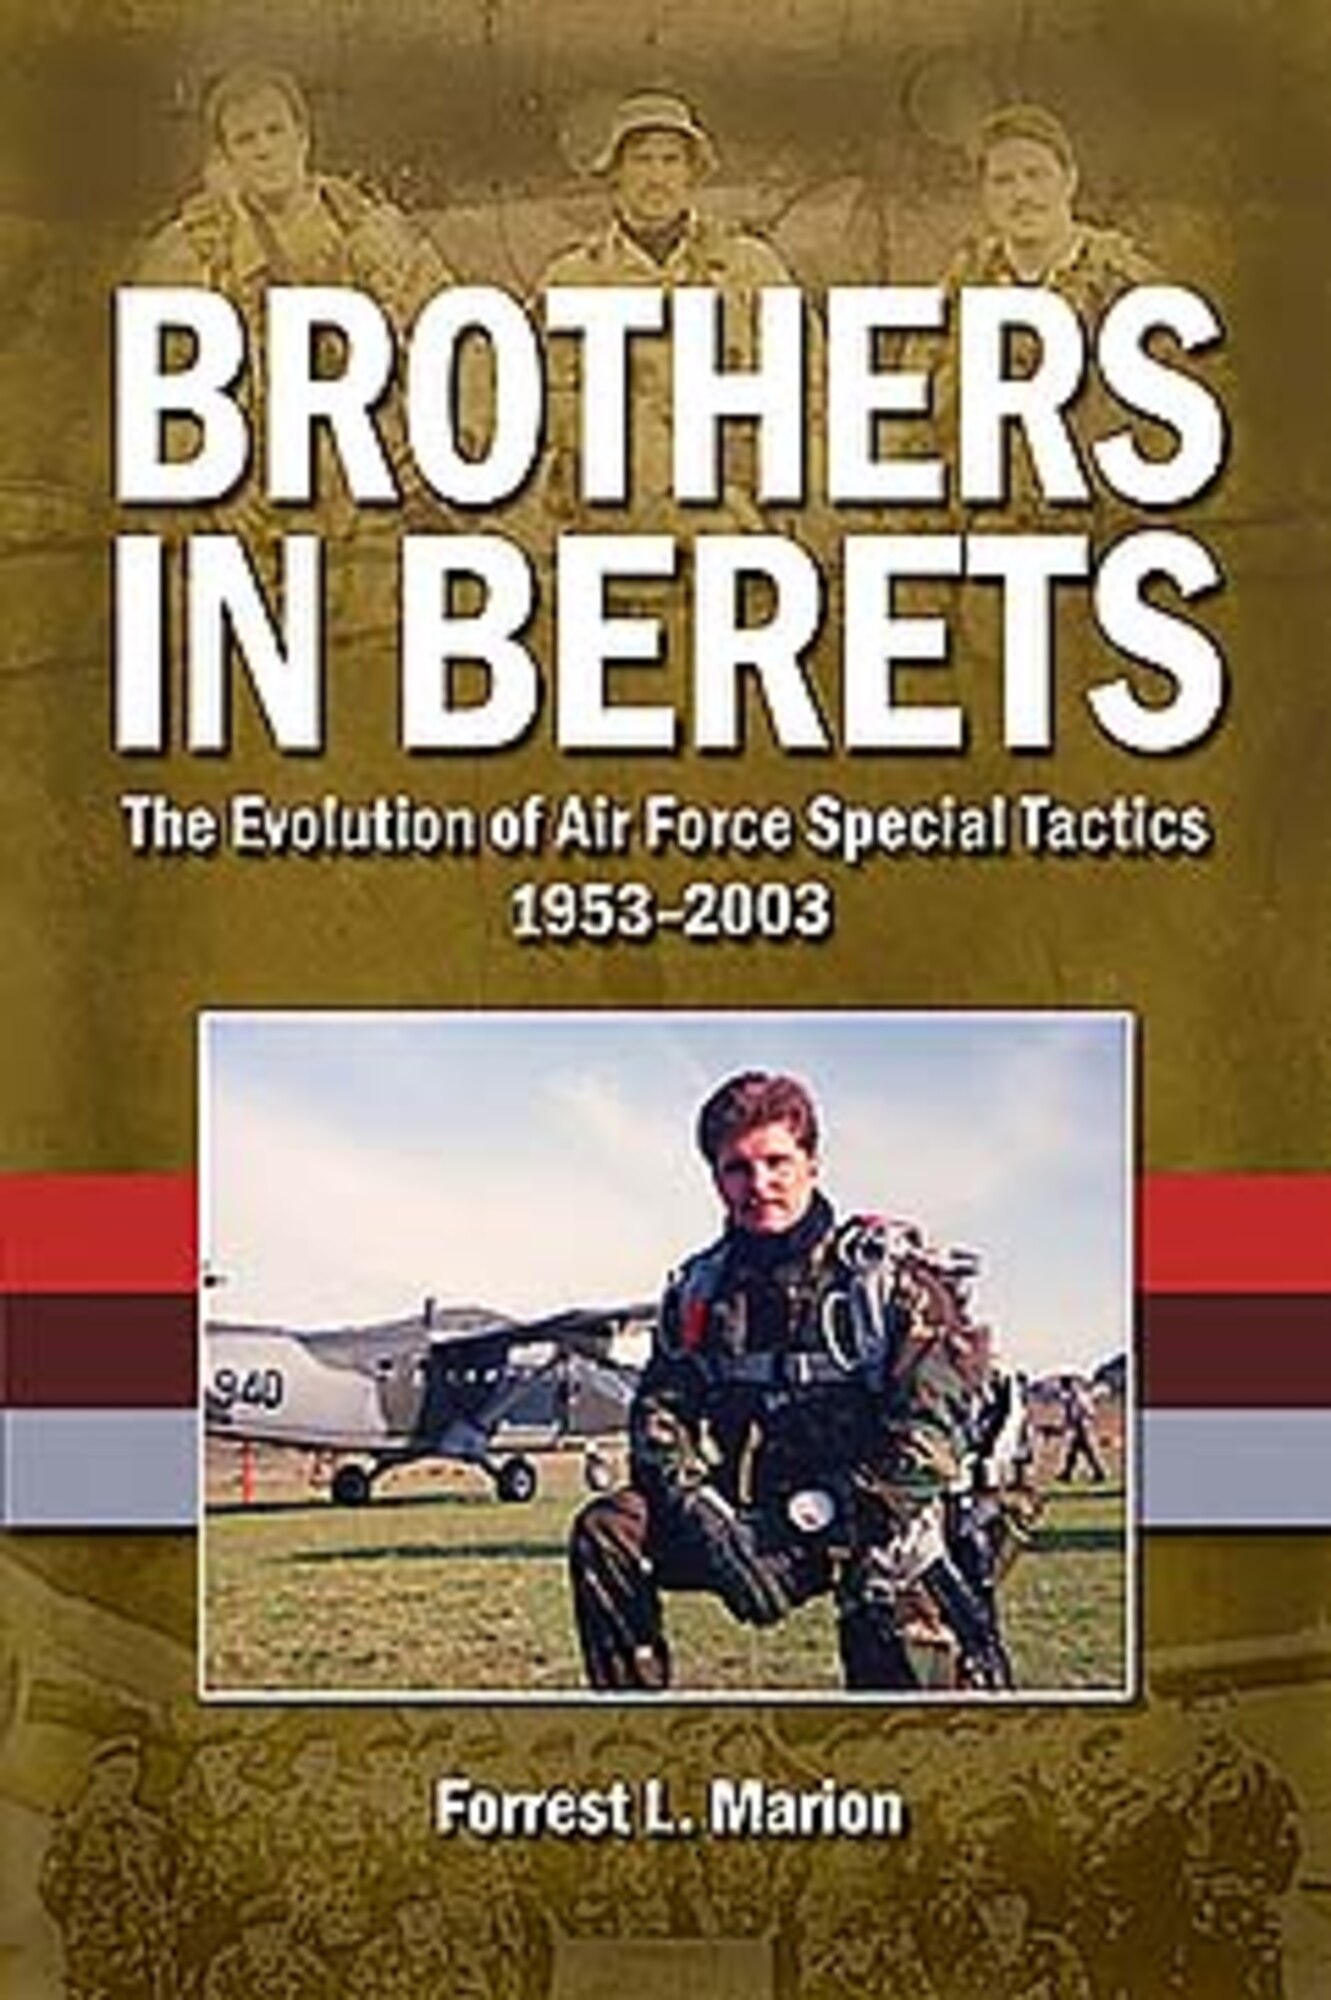 The "Brothers In Berets" cover art. (Courtesy Photo)